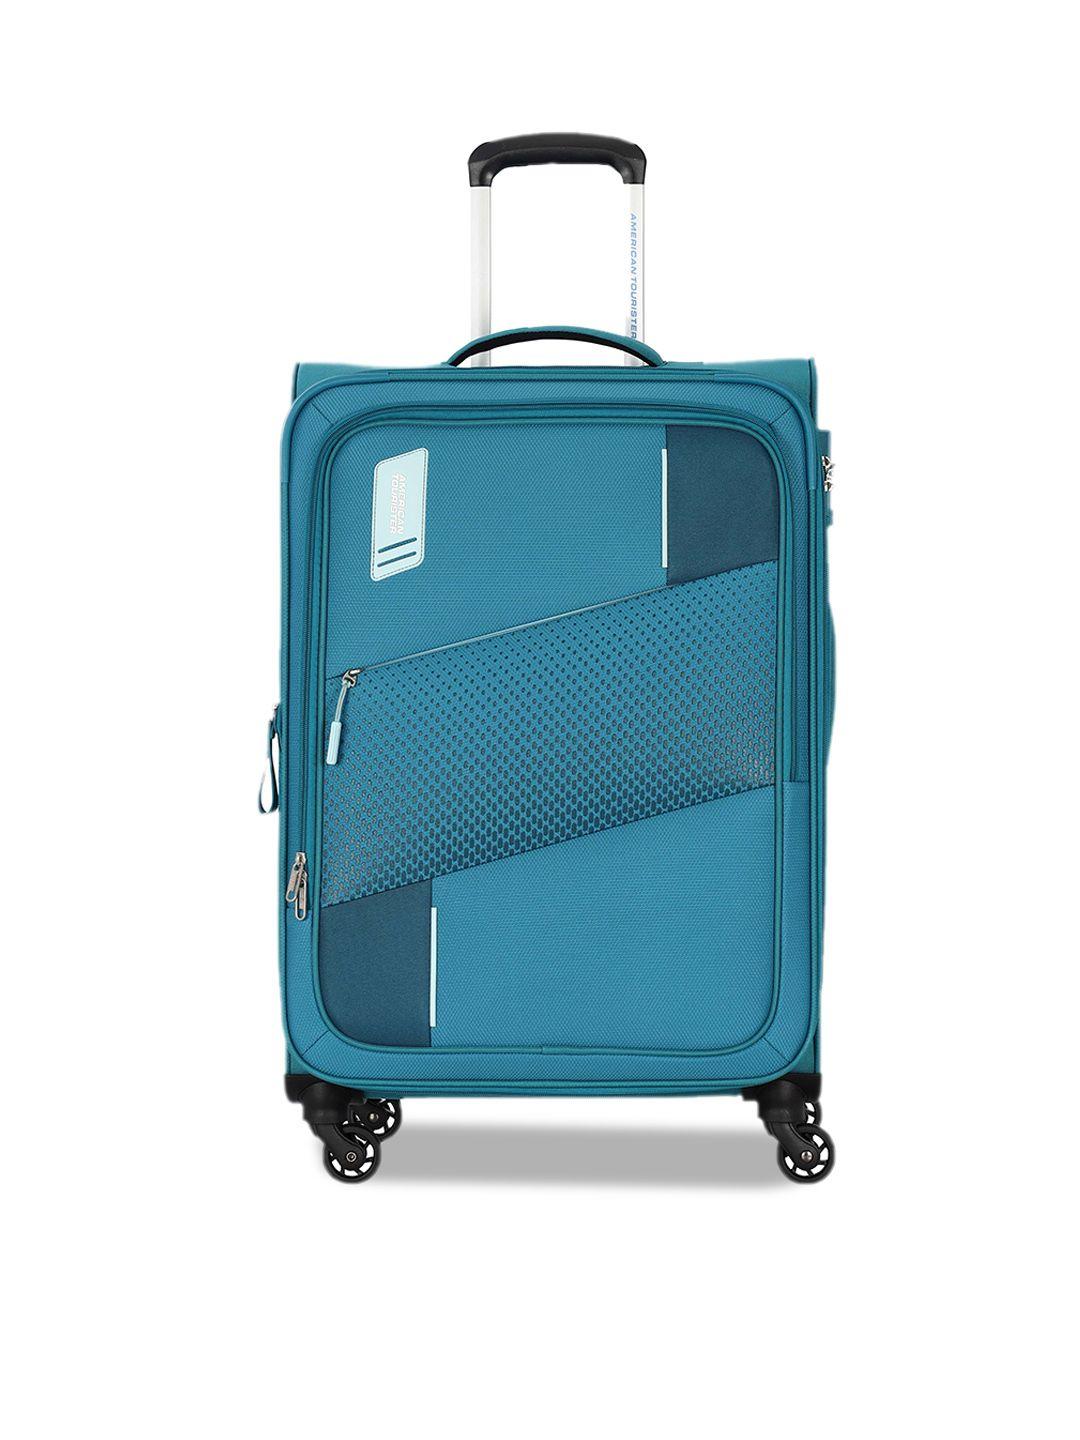 american tourister textured water resistant soft-sided large trolley suitcase